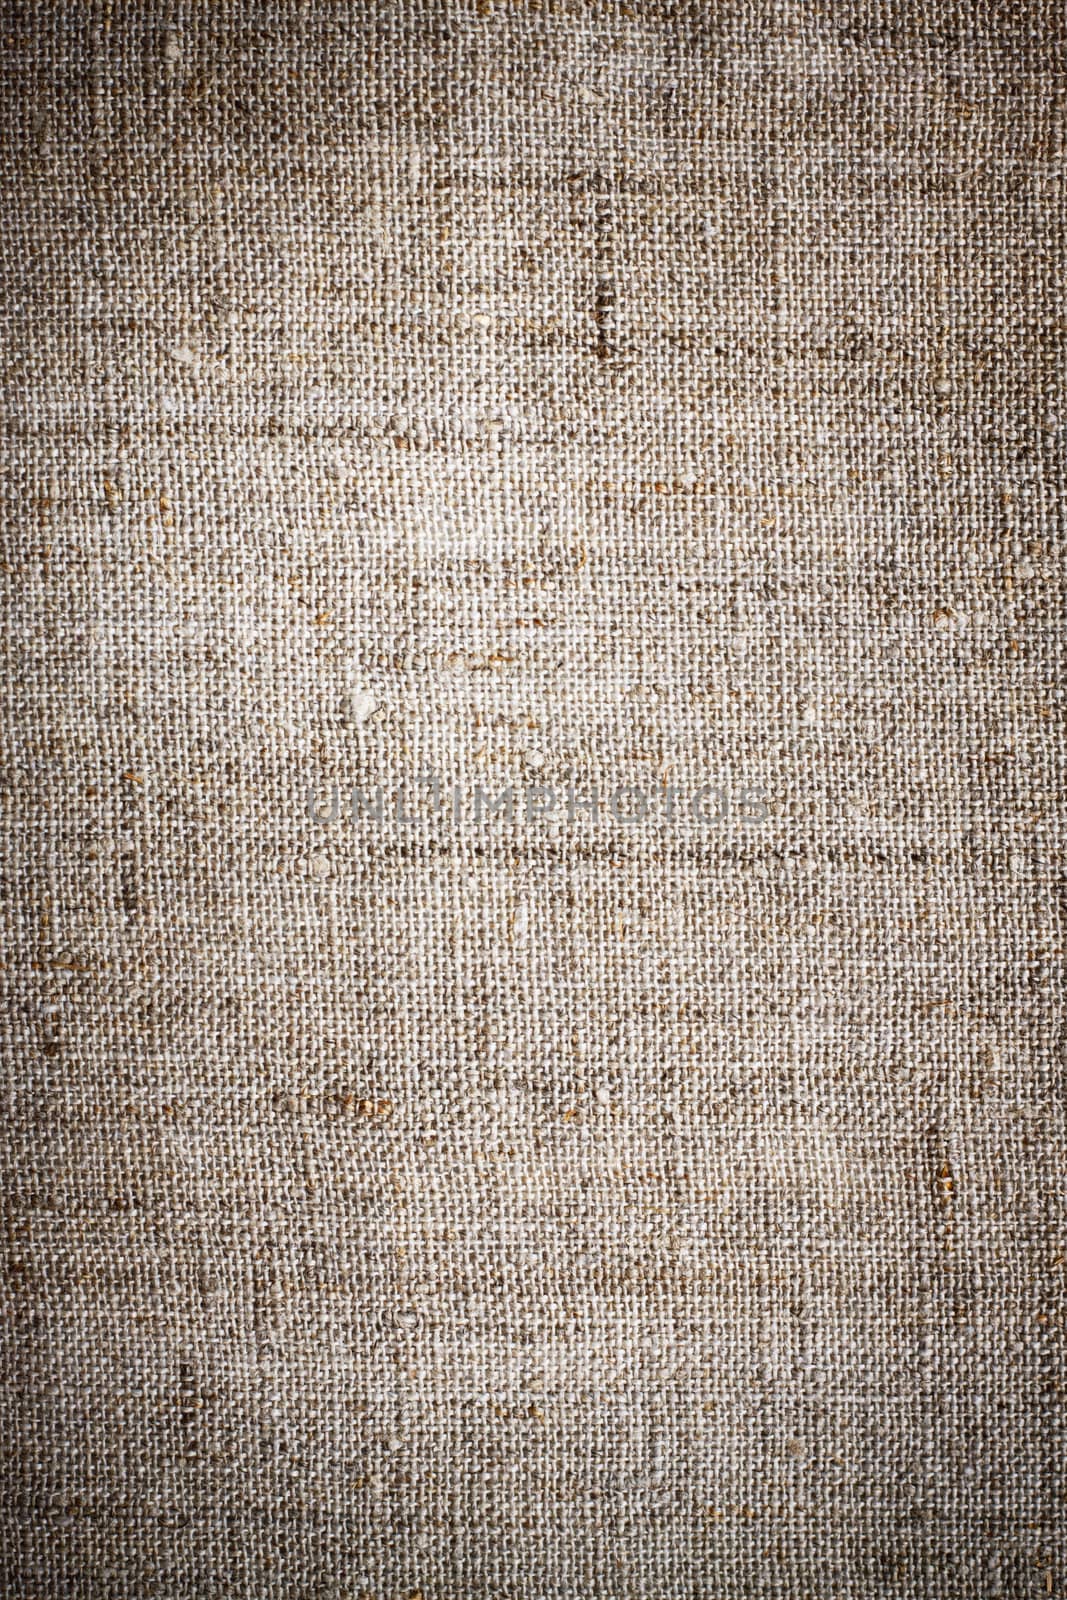 old brown canvas grunge texture as background